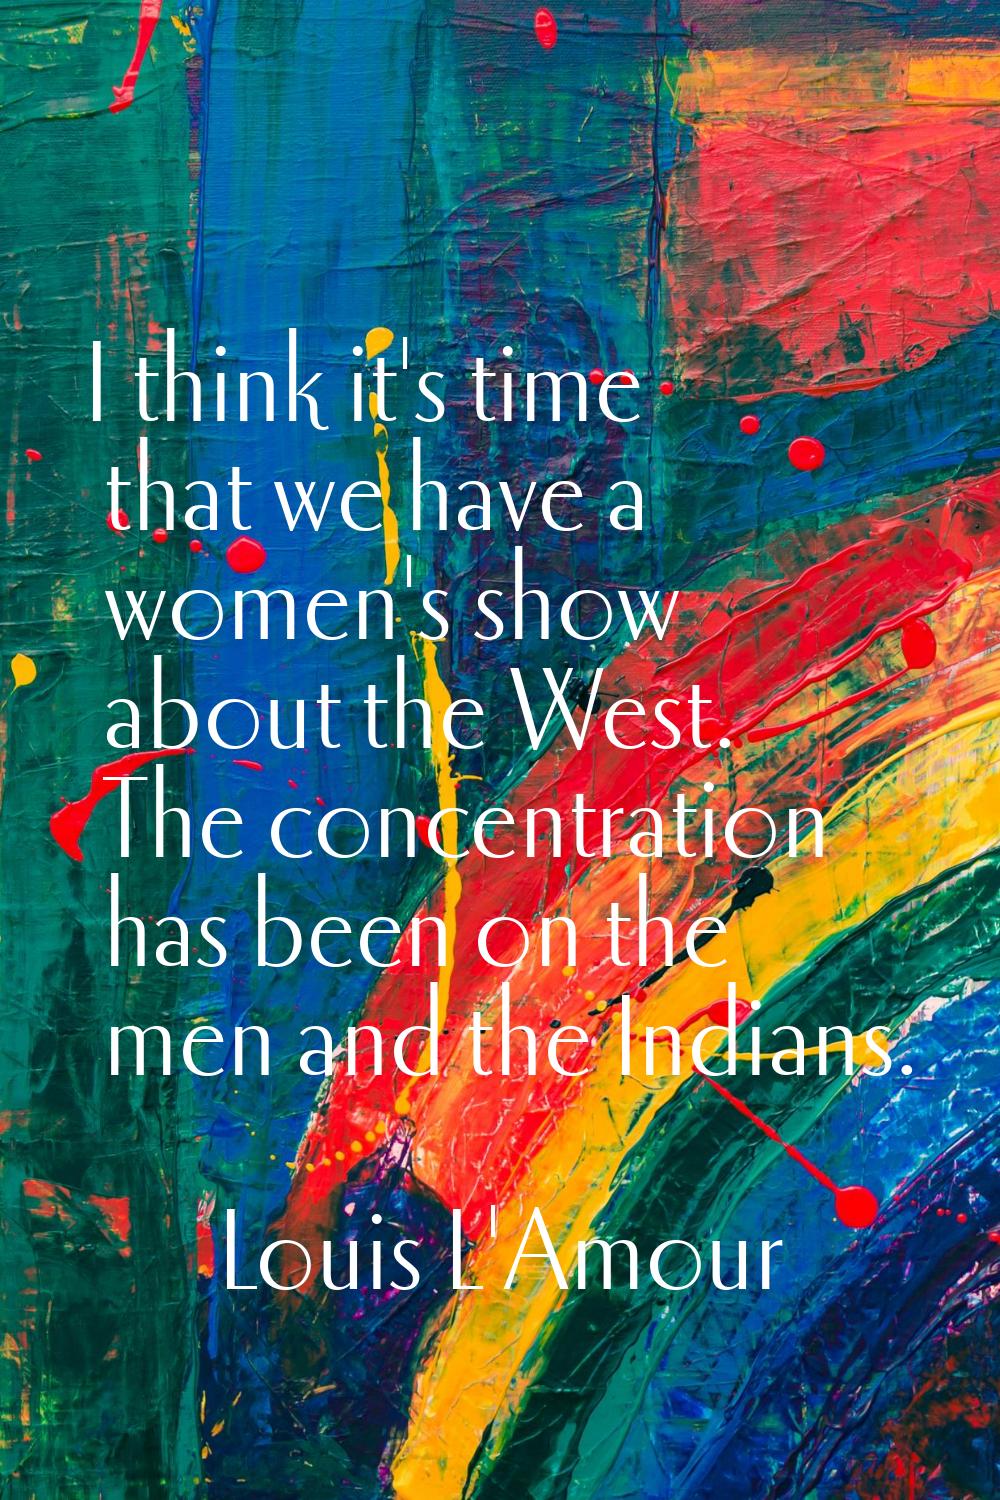 I think it's time that we have a women's show about the West. The concentration has been on the men